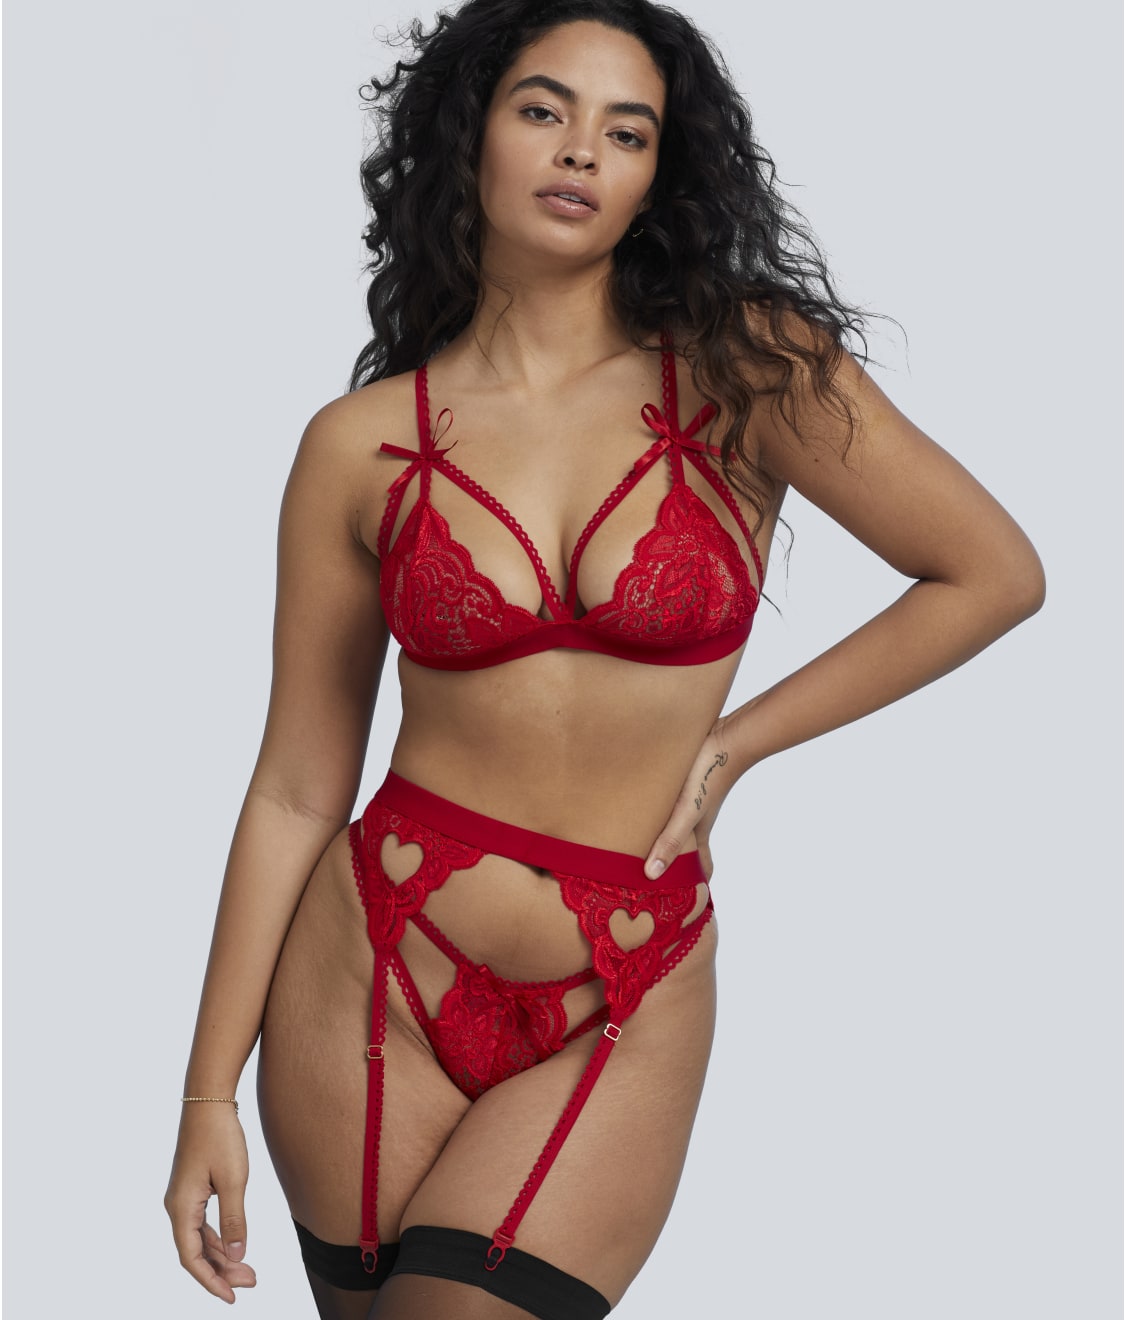 Cambiable cola As Types of Lingerie & Lingerie Styles for Any Body Type | Bare Necessities